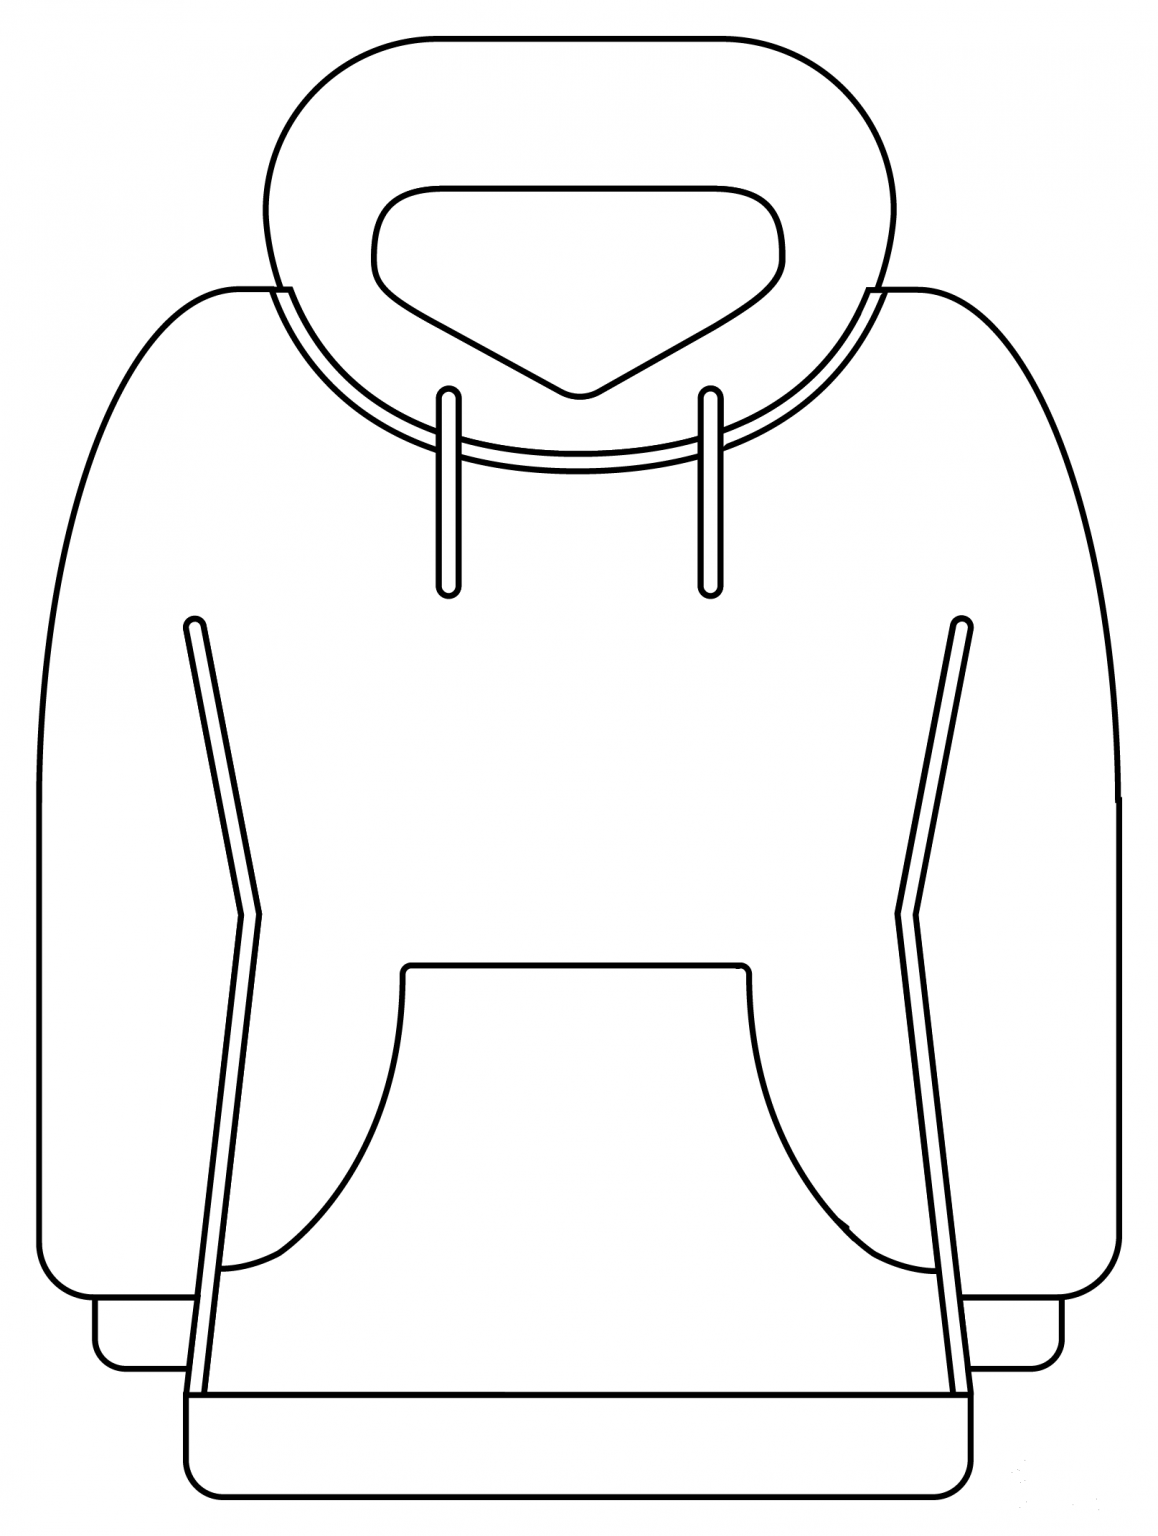 Hoodie coloring page - ColouringPages